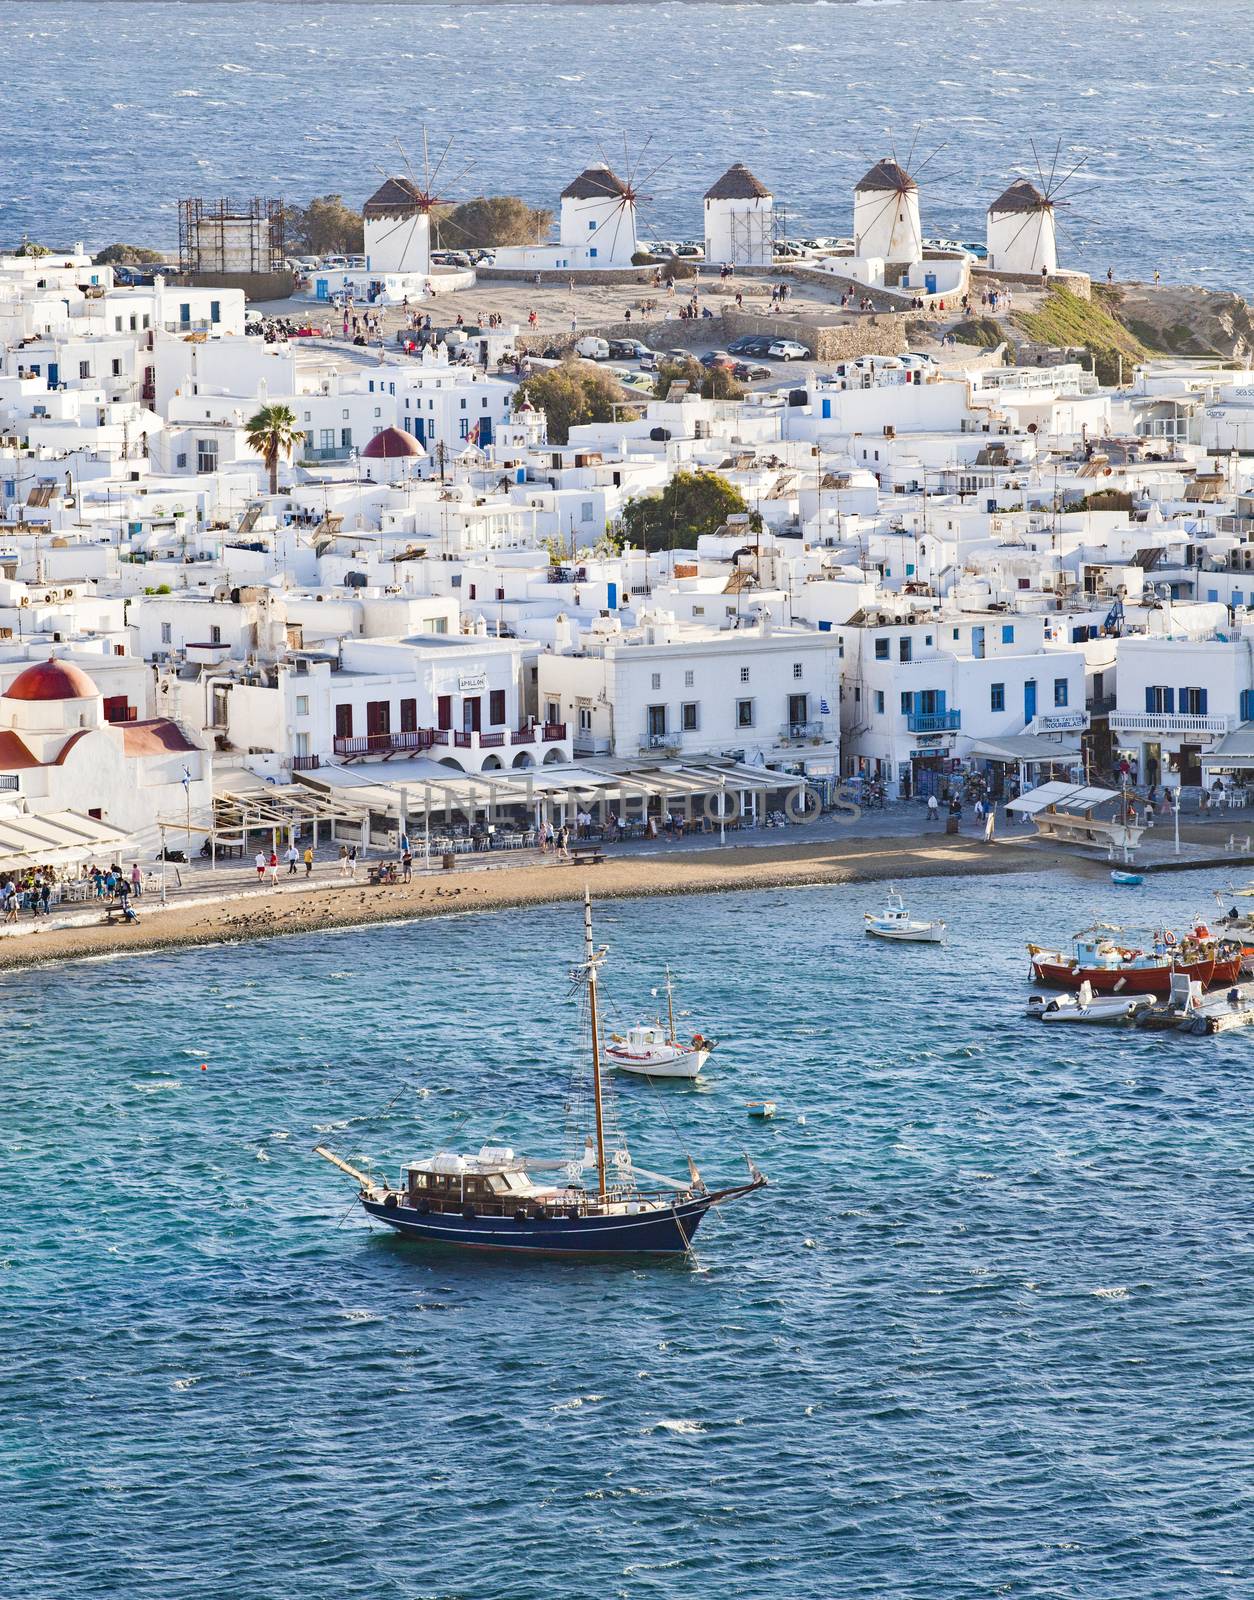 panoramic view of the Mykonos town harbor with famous windmills  by melis